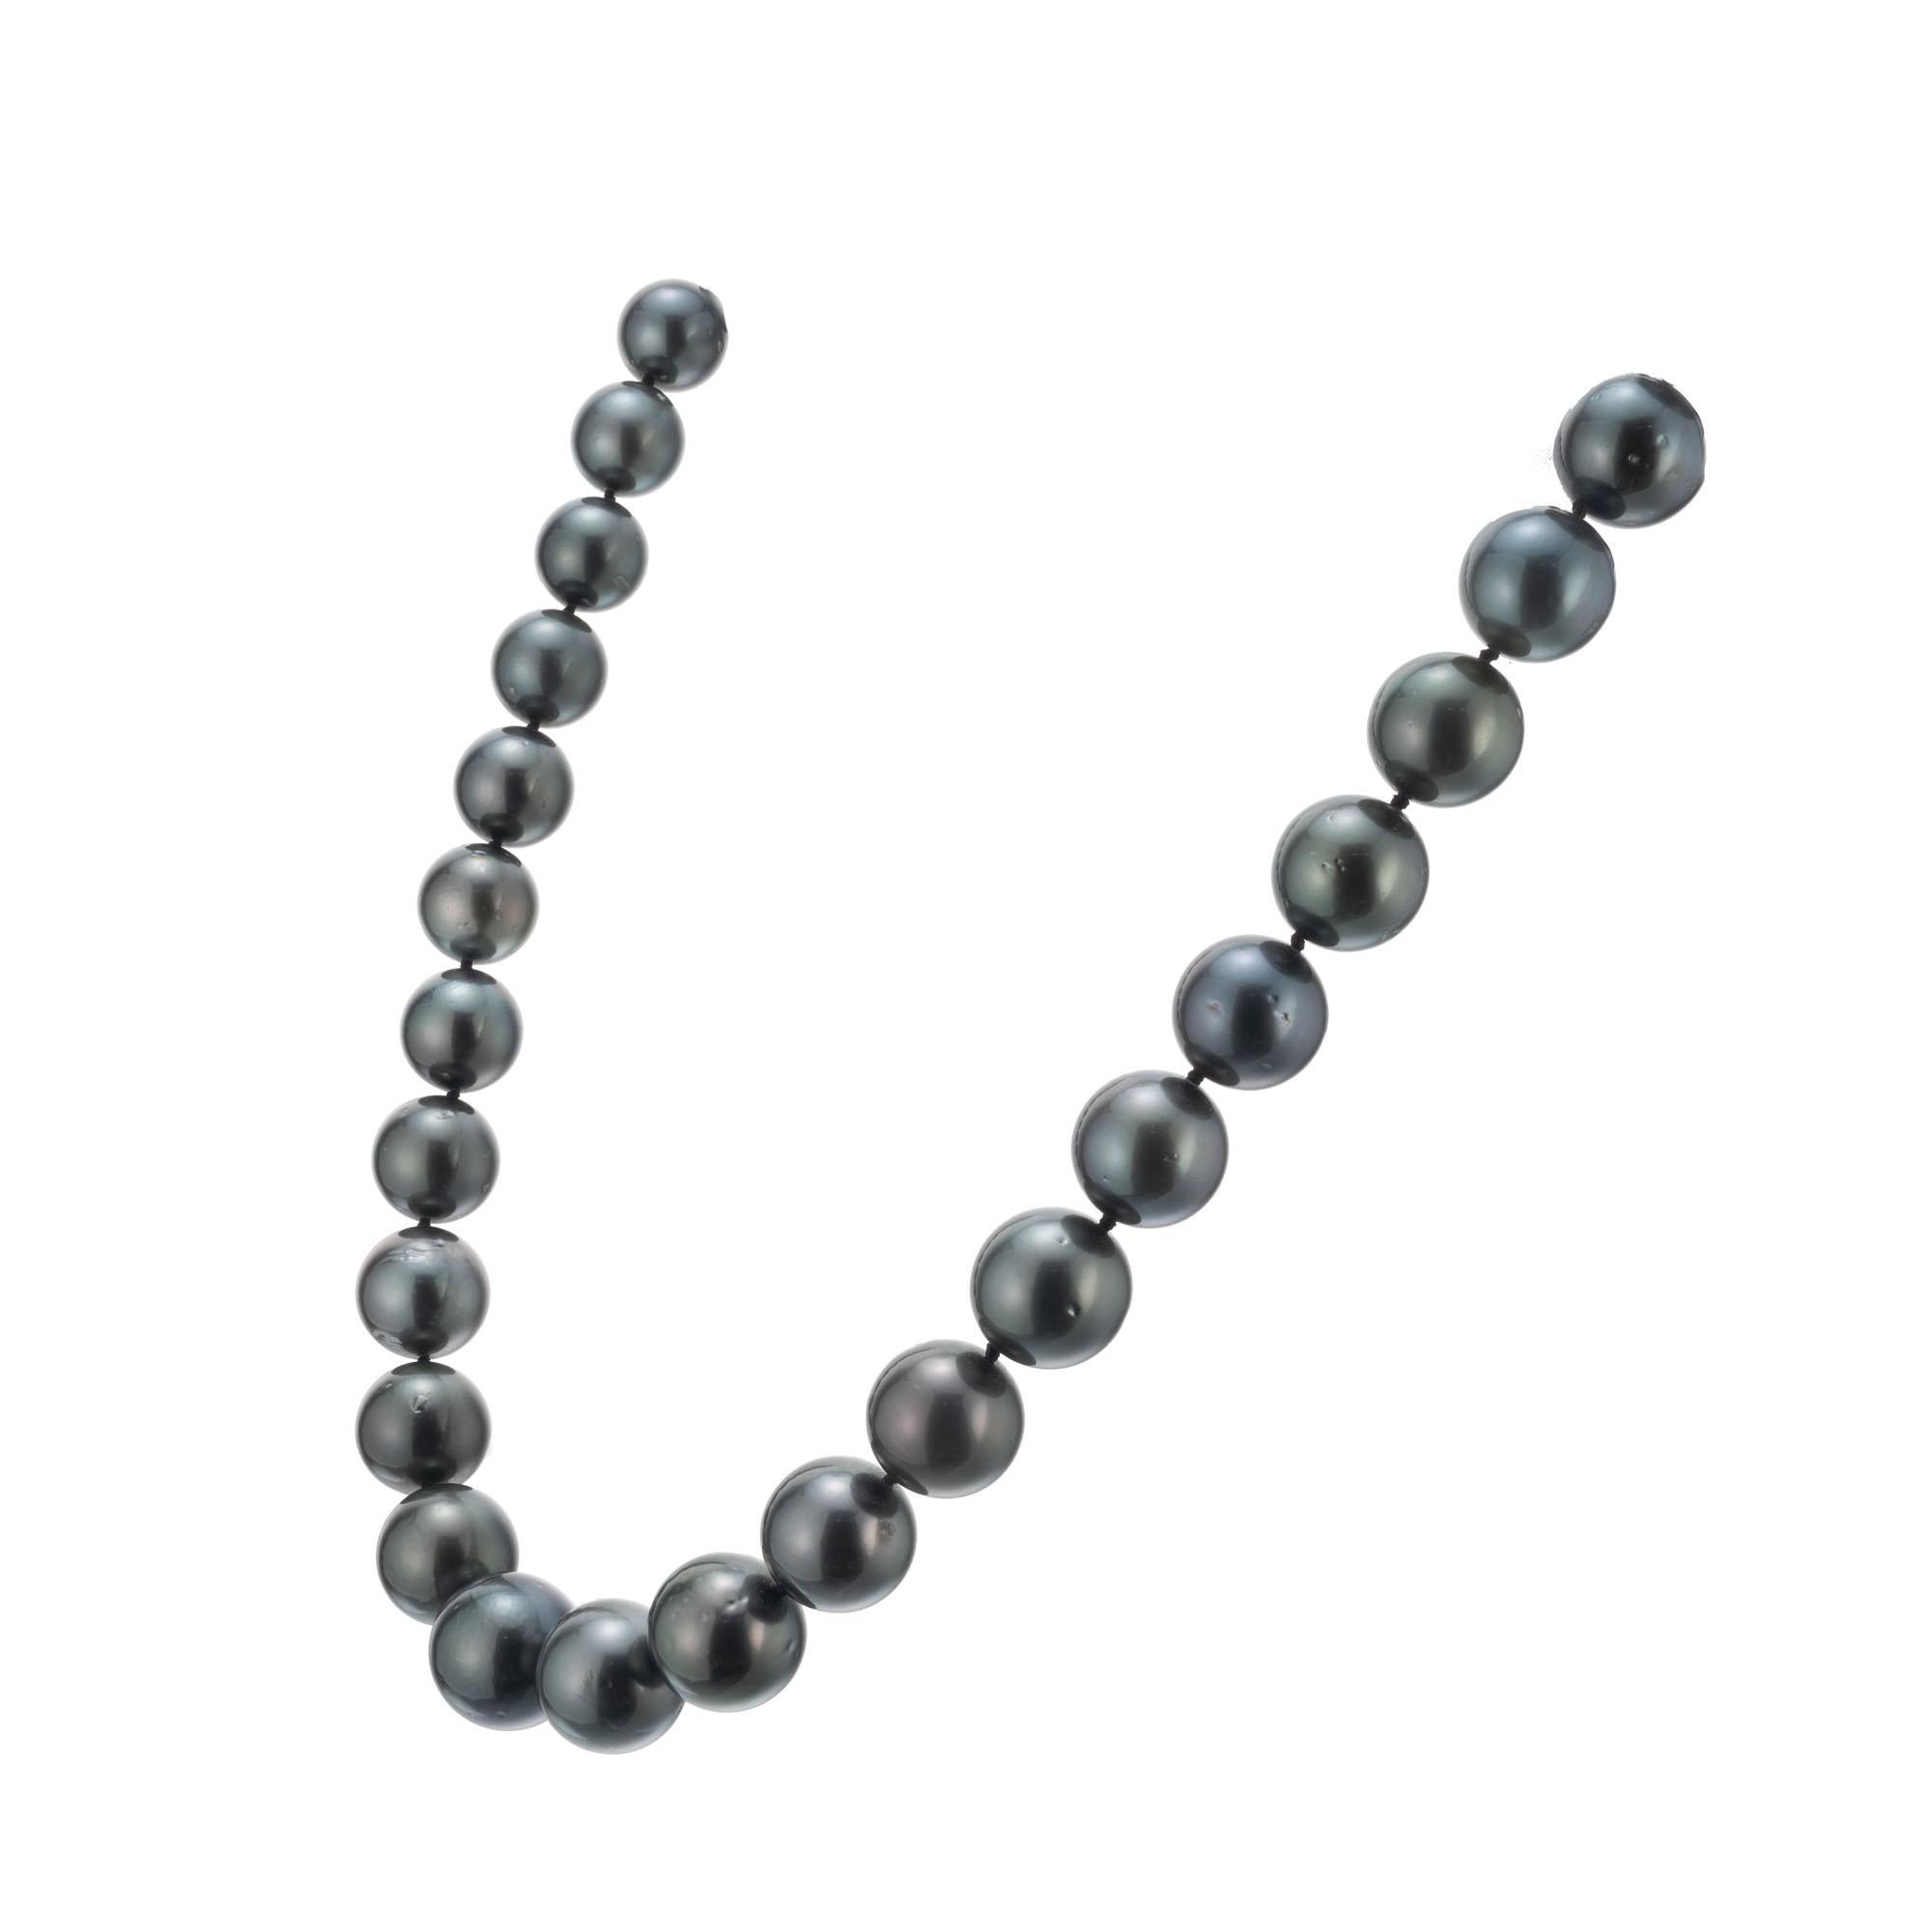 Graduating Tahitian pearl necklace. 18 Inch necklace of Tahitian pearls graduating from 11mm to 14.6mm at the center with an 18k yellow gold corrugated ball clasp. Good Lustre, well matched, few to moderate blemishes.

33 Tahitian black pearls, 11mm